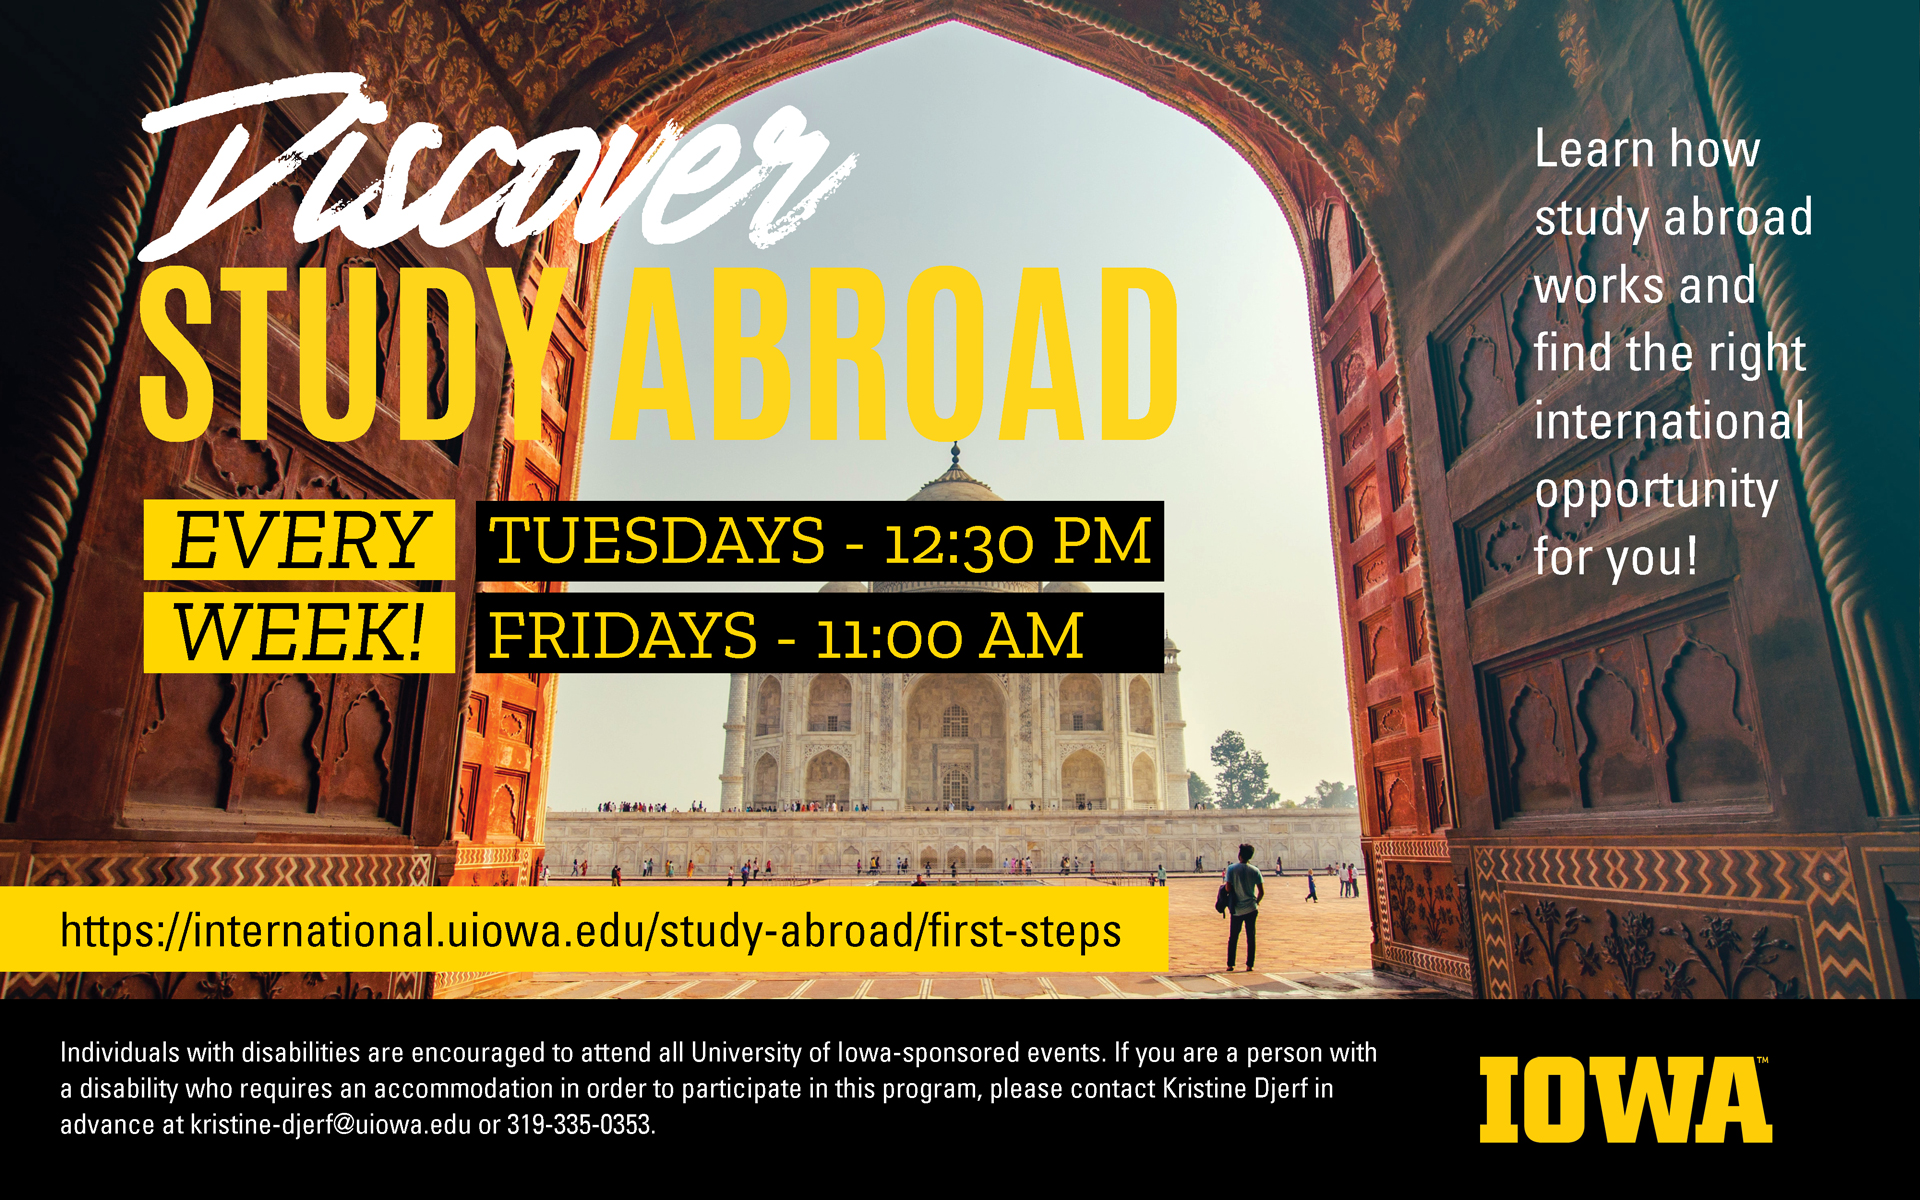 Discover Study Abroad every week Tuesdays at 12 thirty and Fridays ay 11 am Learn how study abroad works and find the right international opportunity for you visit https://international.uiowa.edu/study-sbroad/first-steps